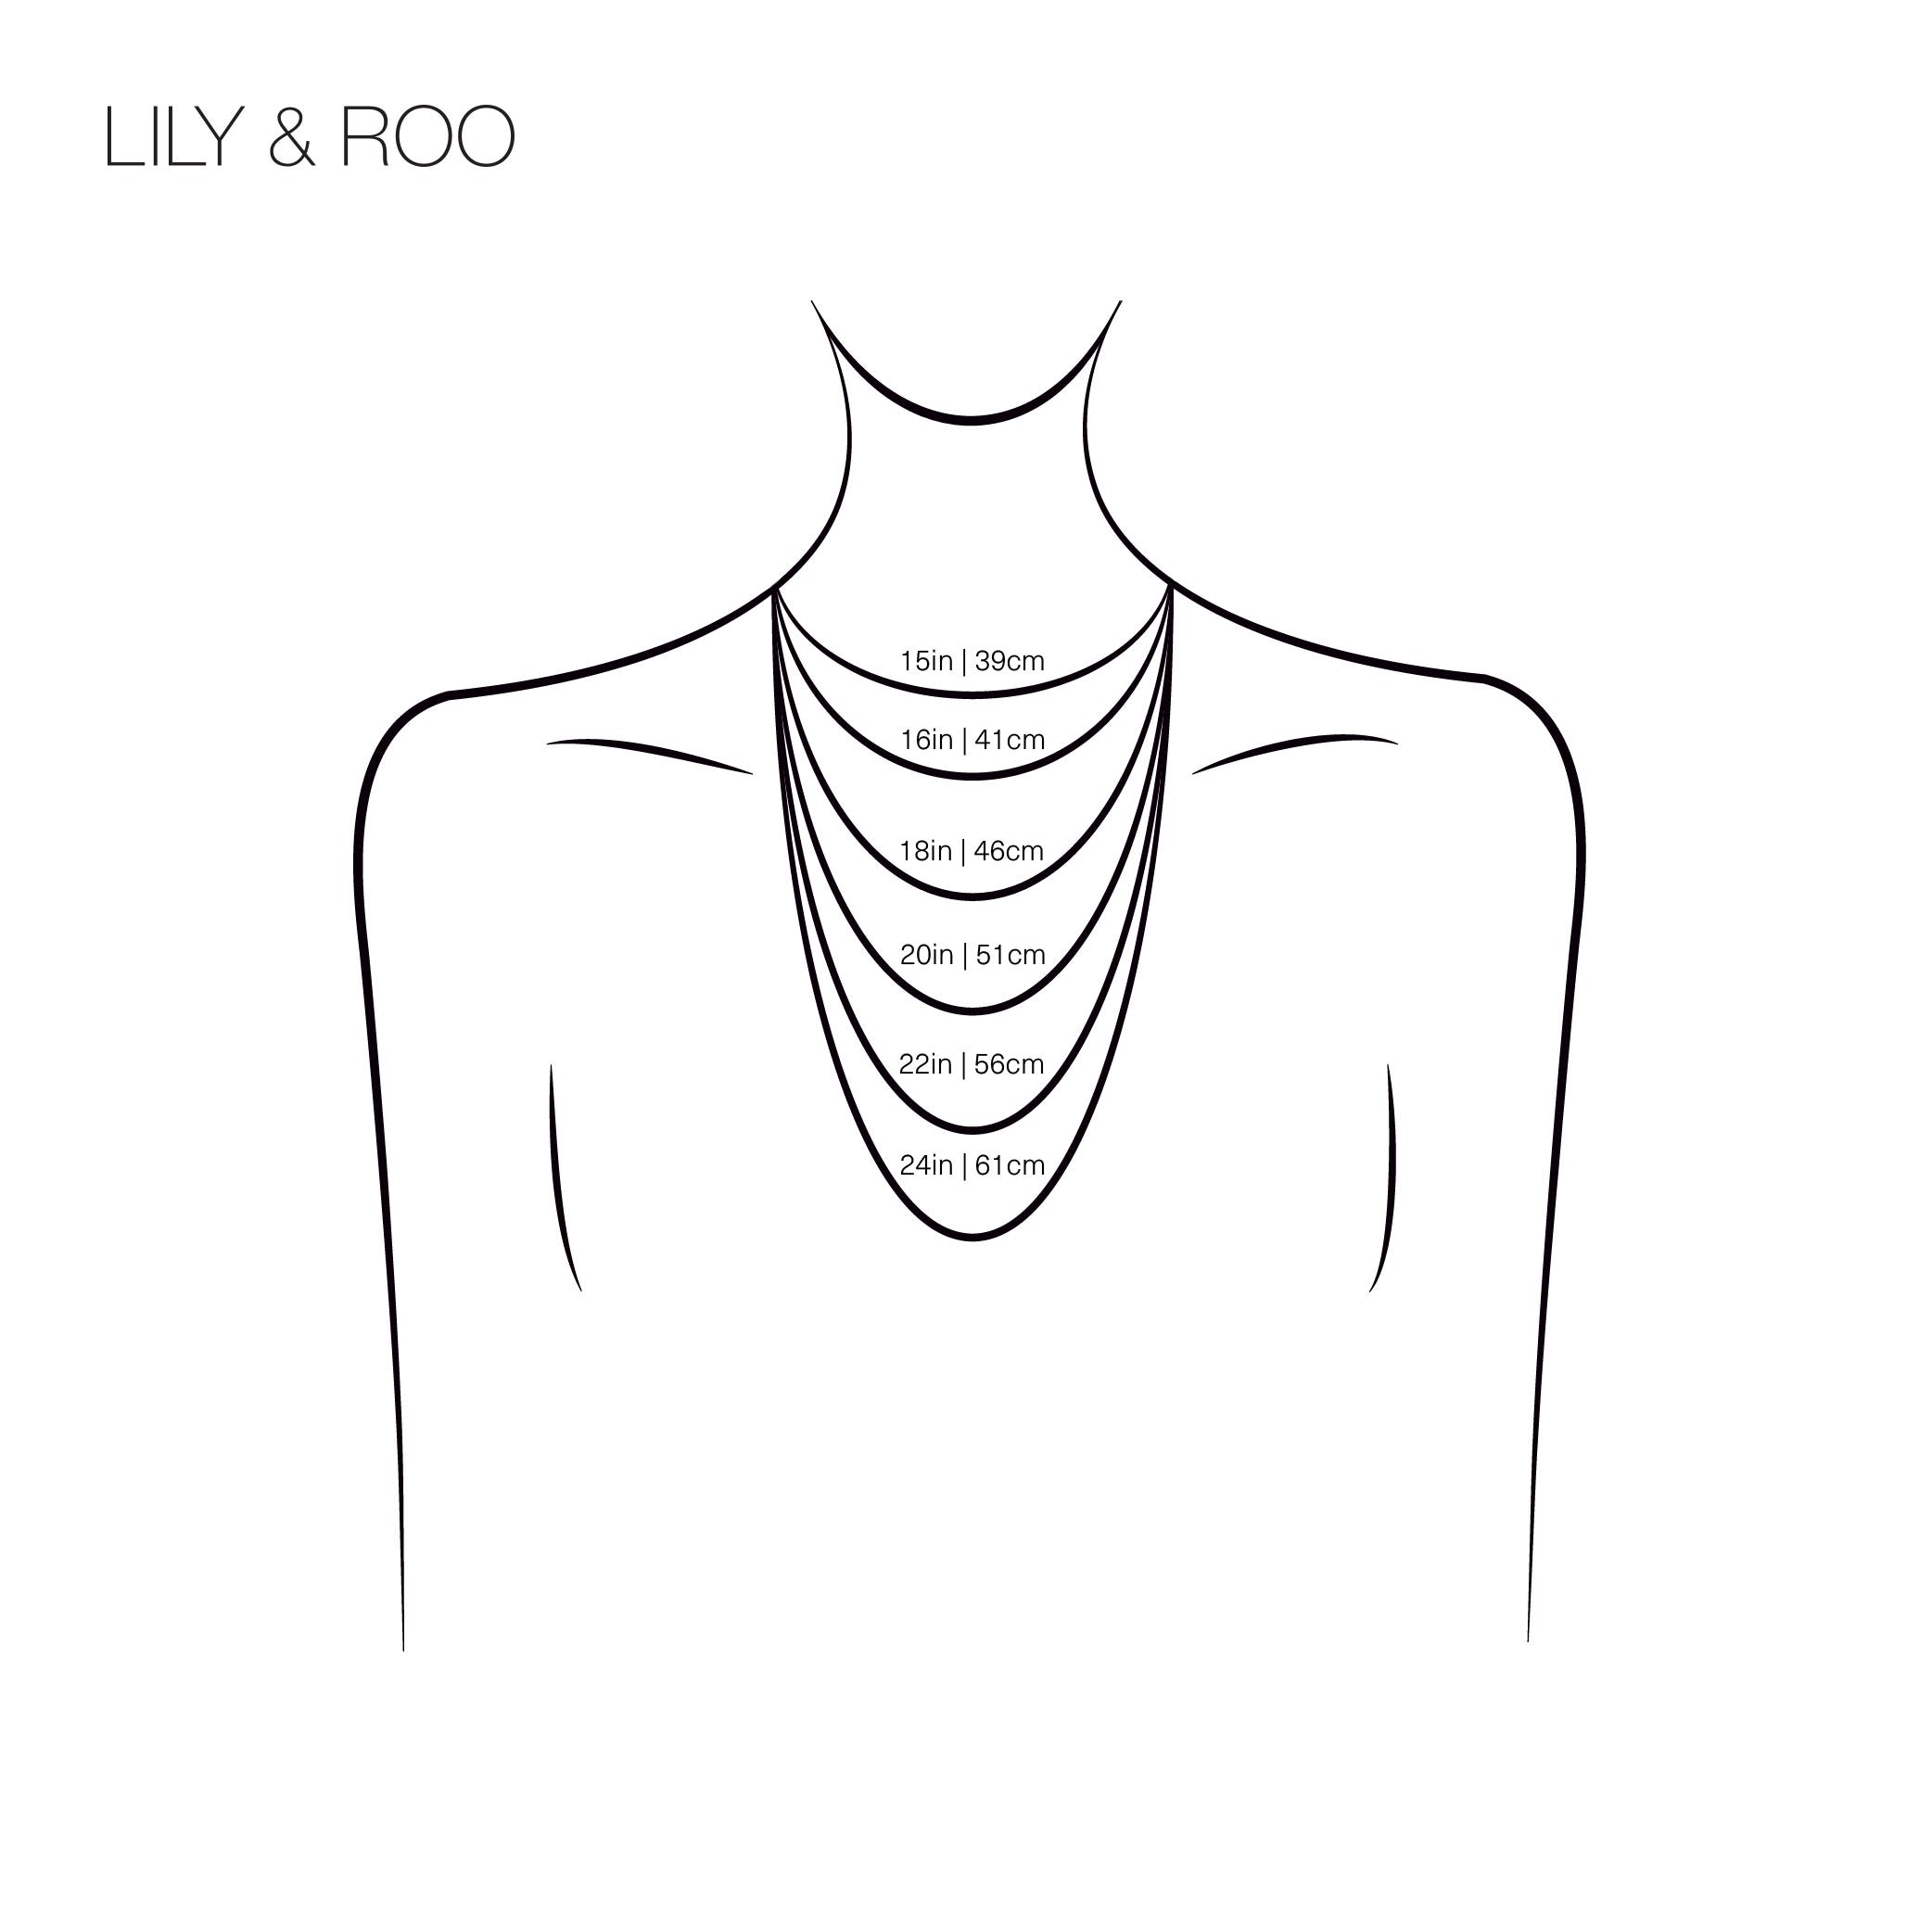 Diagram of necklace lengths around a woman's neck 